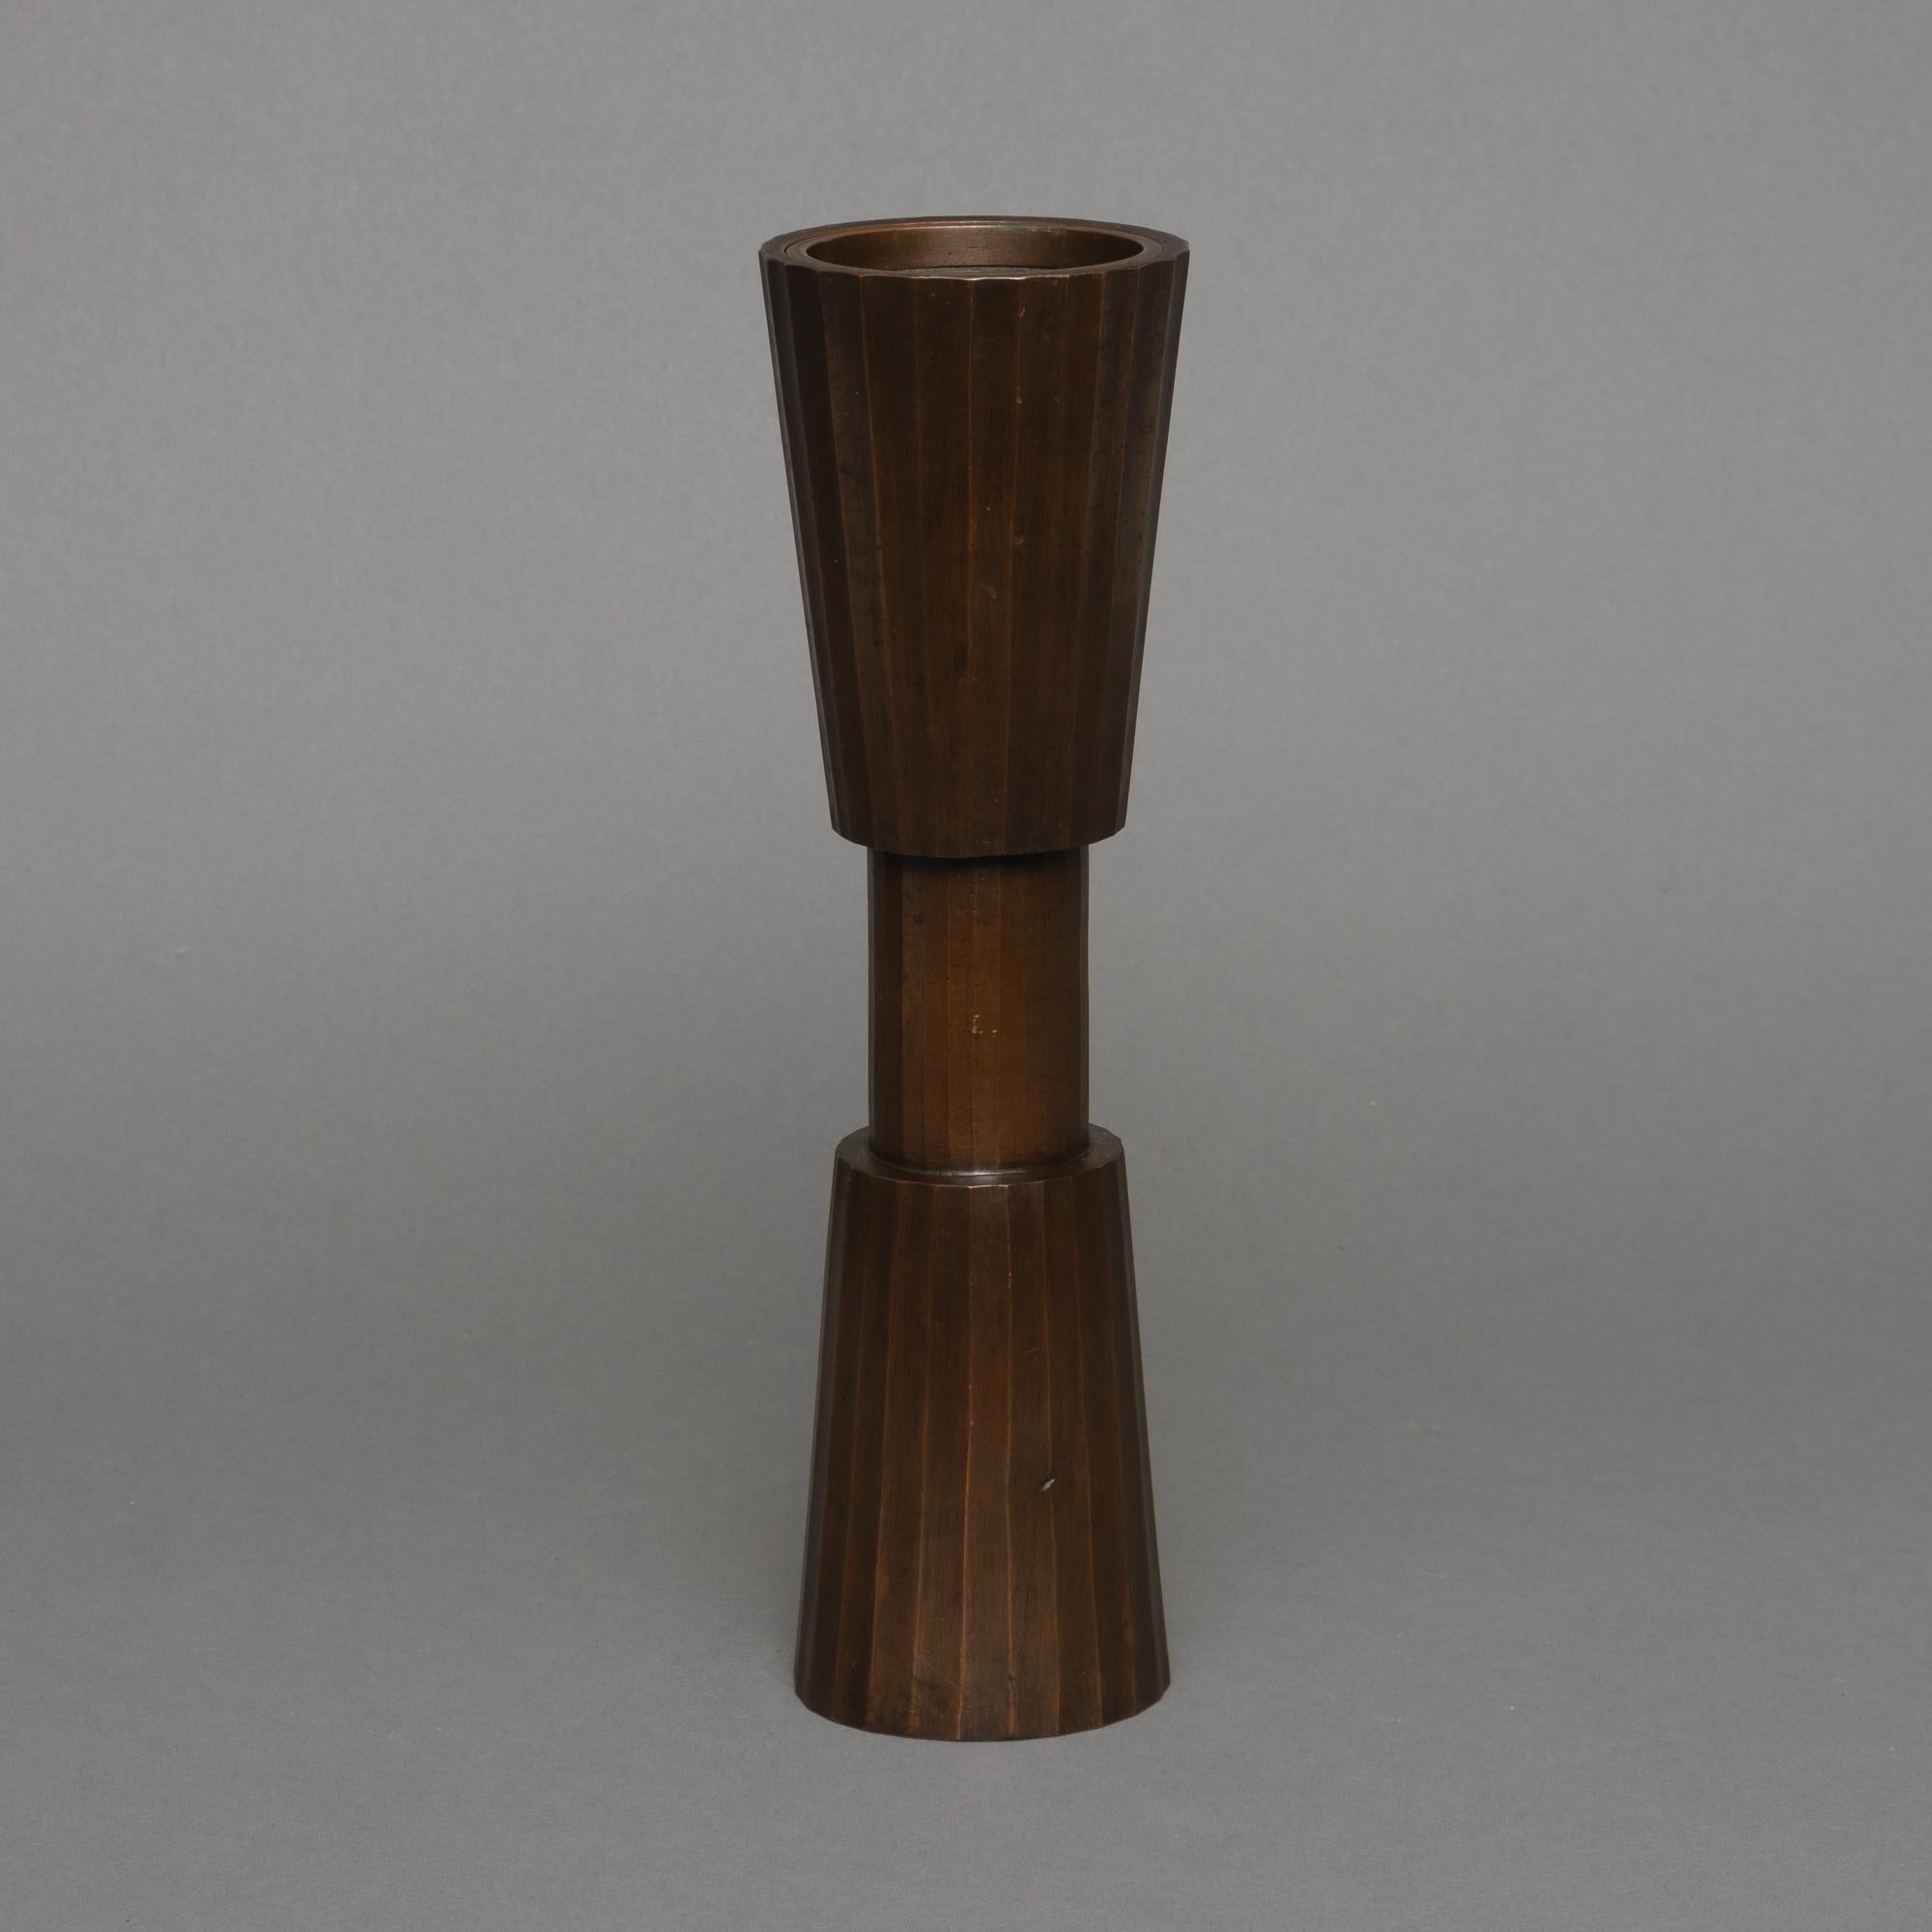 Japanese Patinated Bronze Vase in an Hourglass-Shape with Vertical Ribs 2